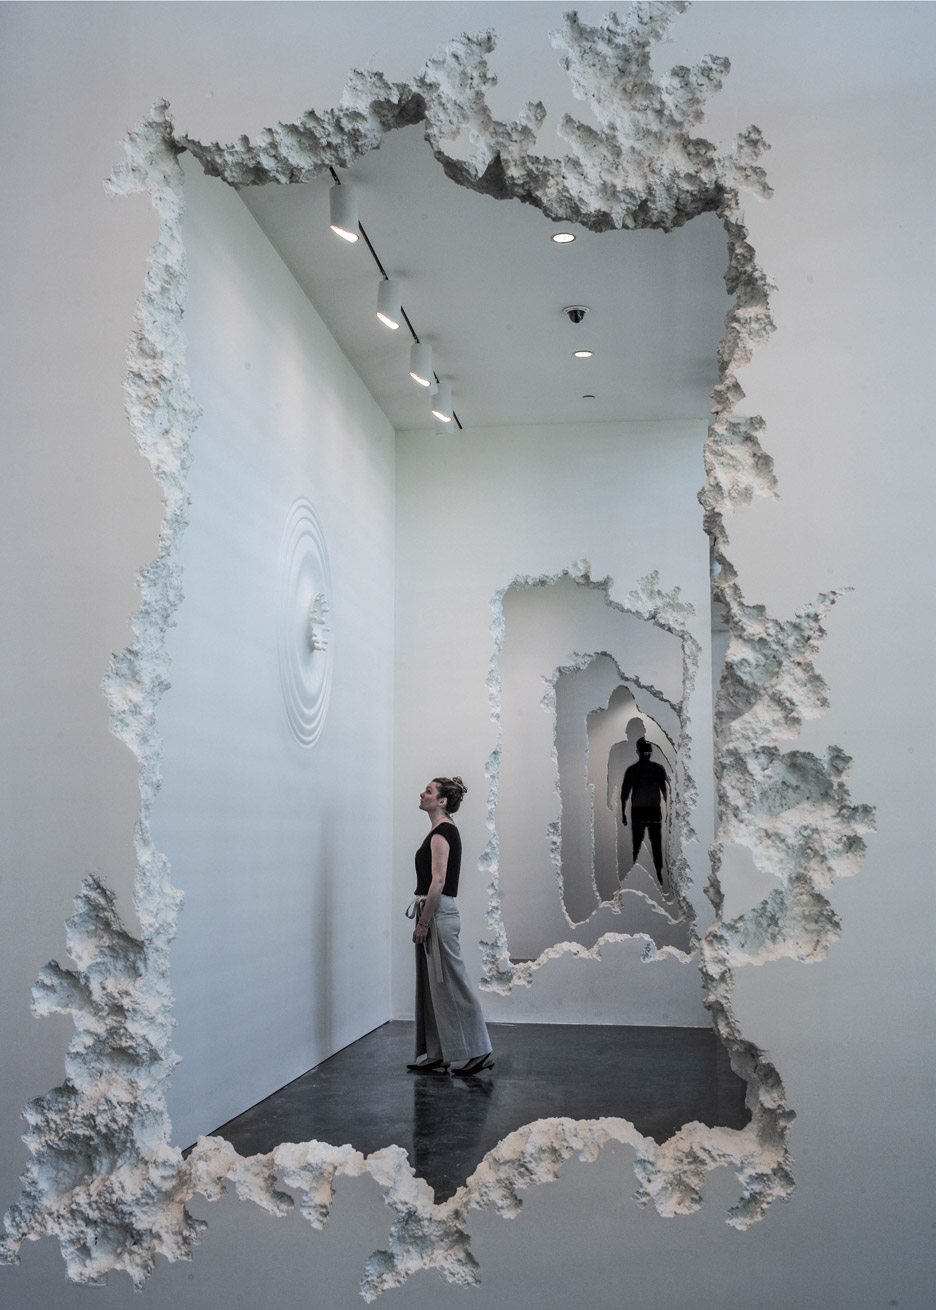 The Future Was Then exhibition by Daniel Arsham at the SCAD Museum of Art in Savannah, Georgia, USA